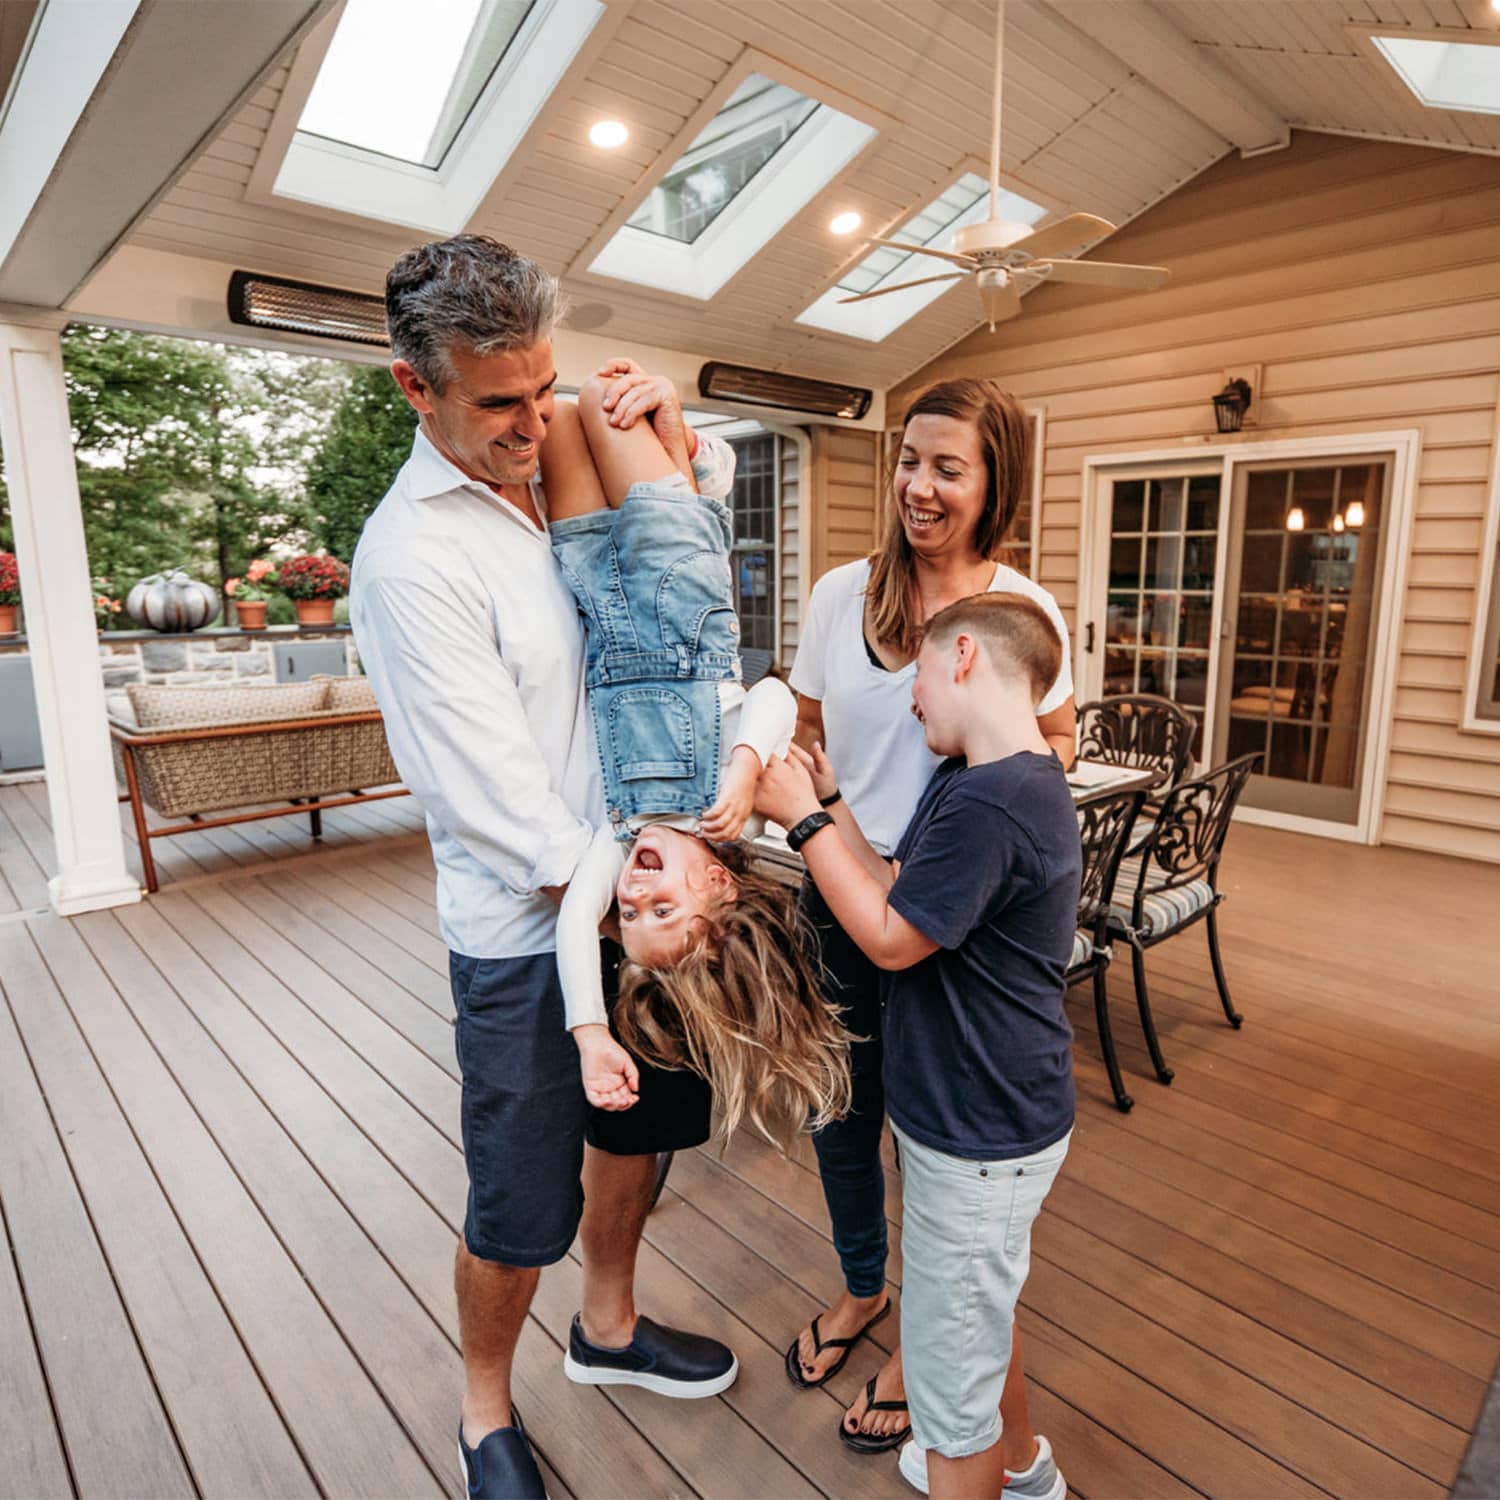 MasterPLAN only implements low maintenance materials in our outdoor living creations, so you can spend more time with your family than maintaining your space!